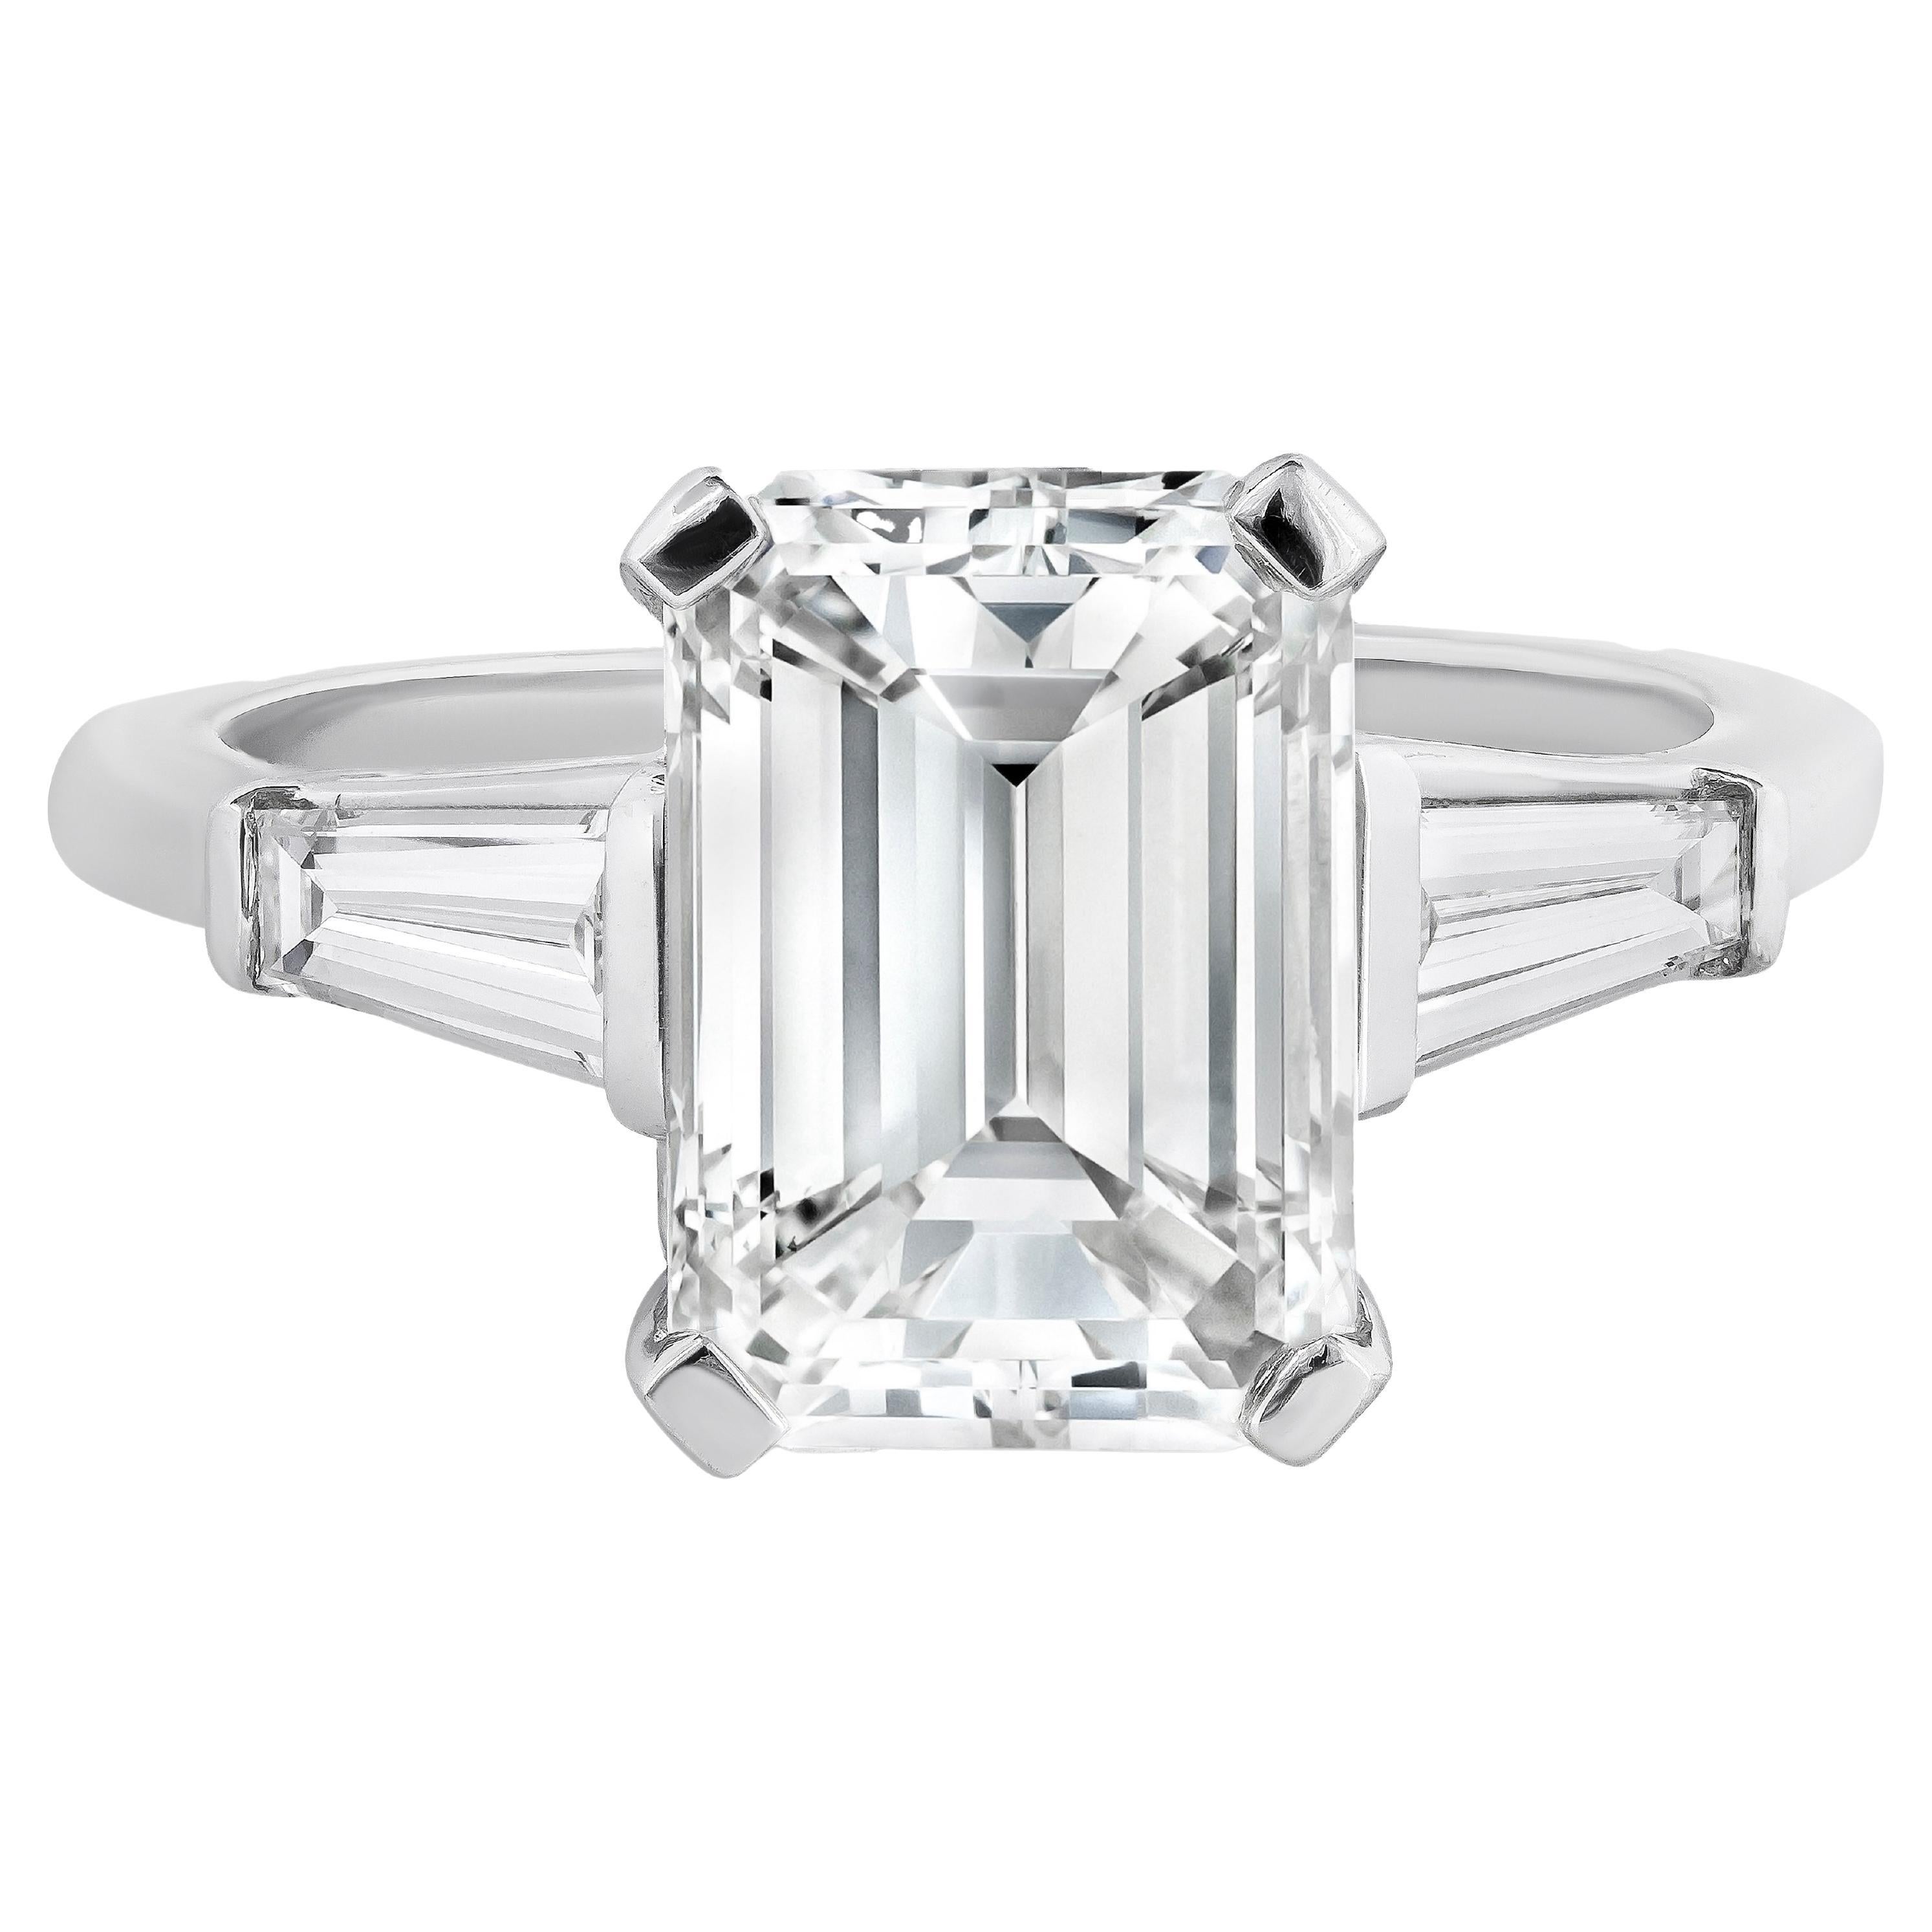 What is the difference between baguette and emerald cut diamonds?